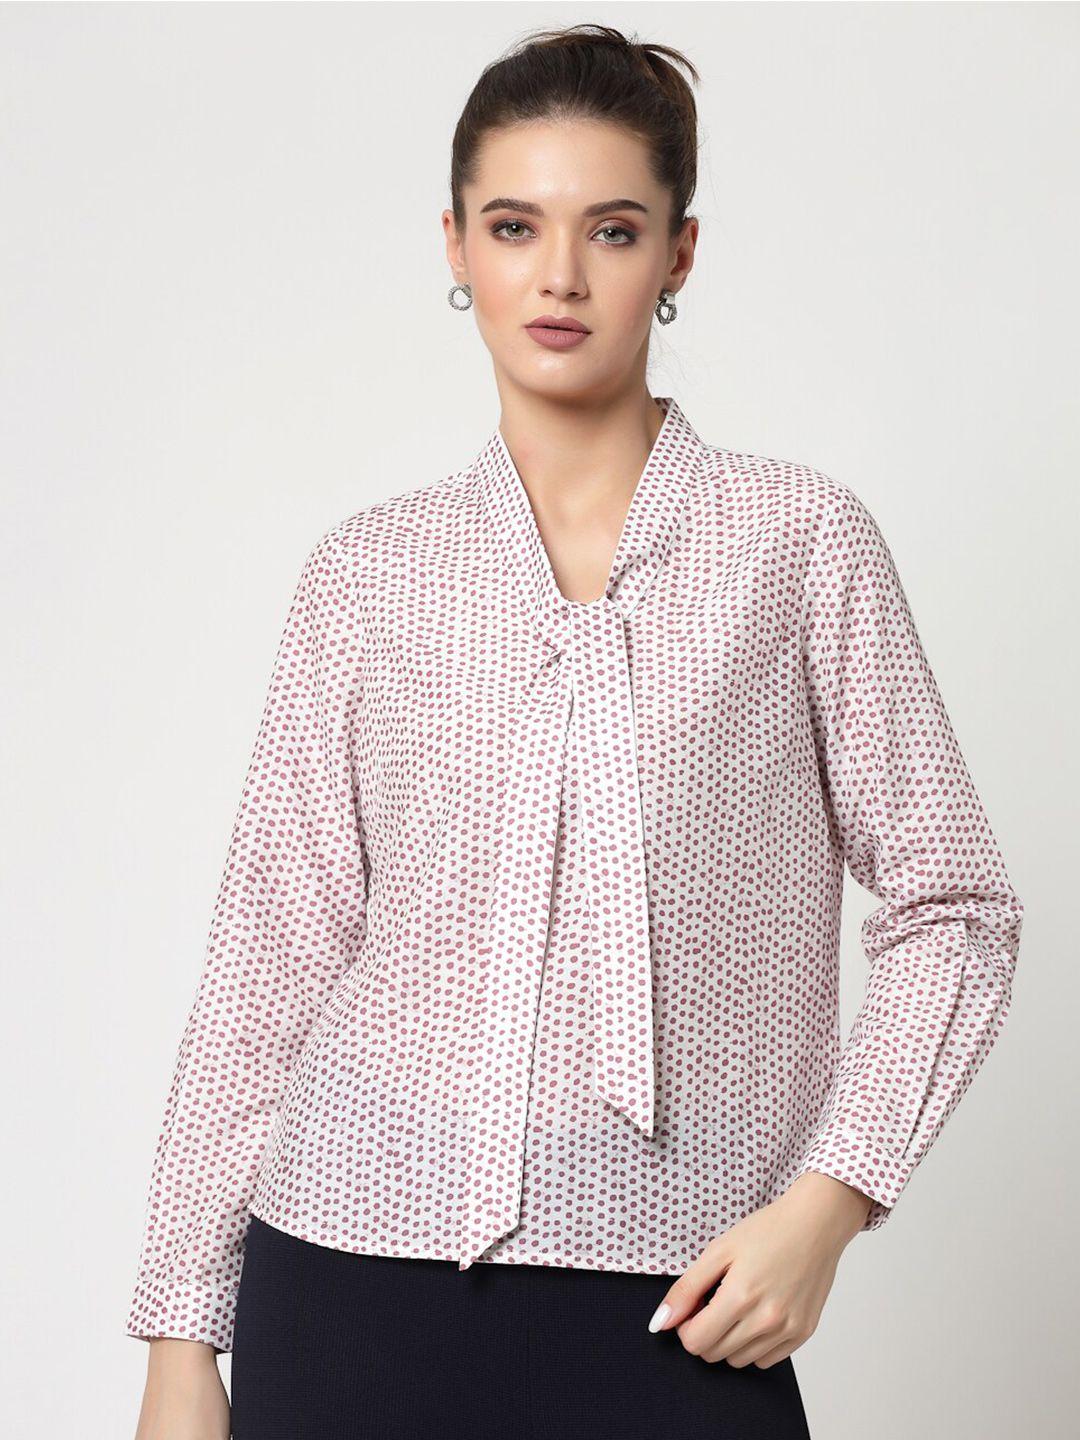 office & you geometric printed tie-up neck shirt style top